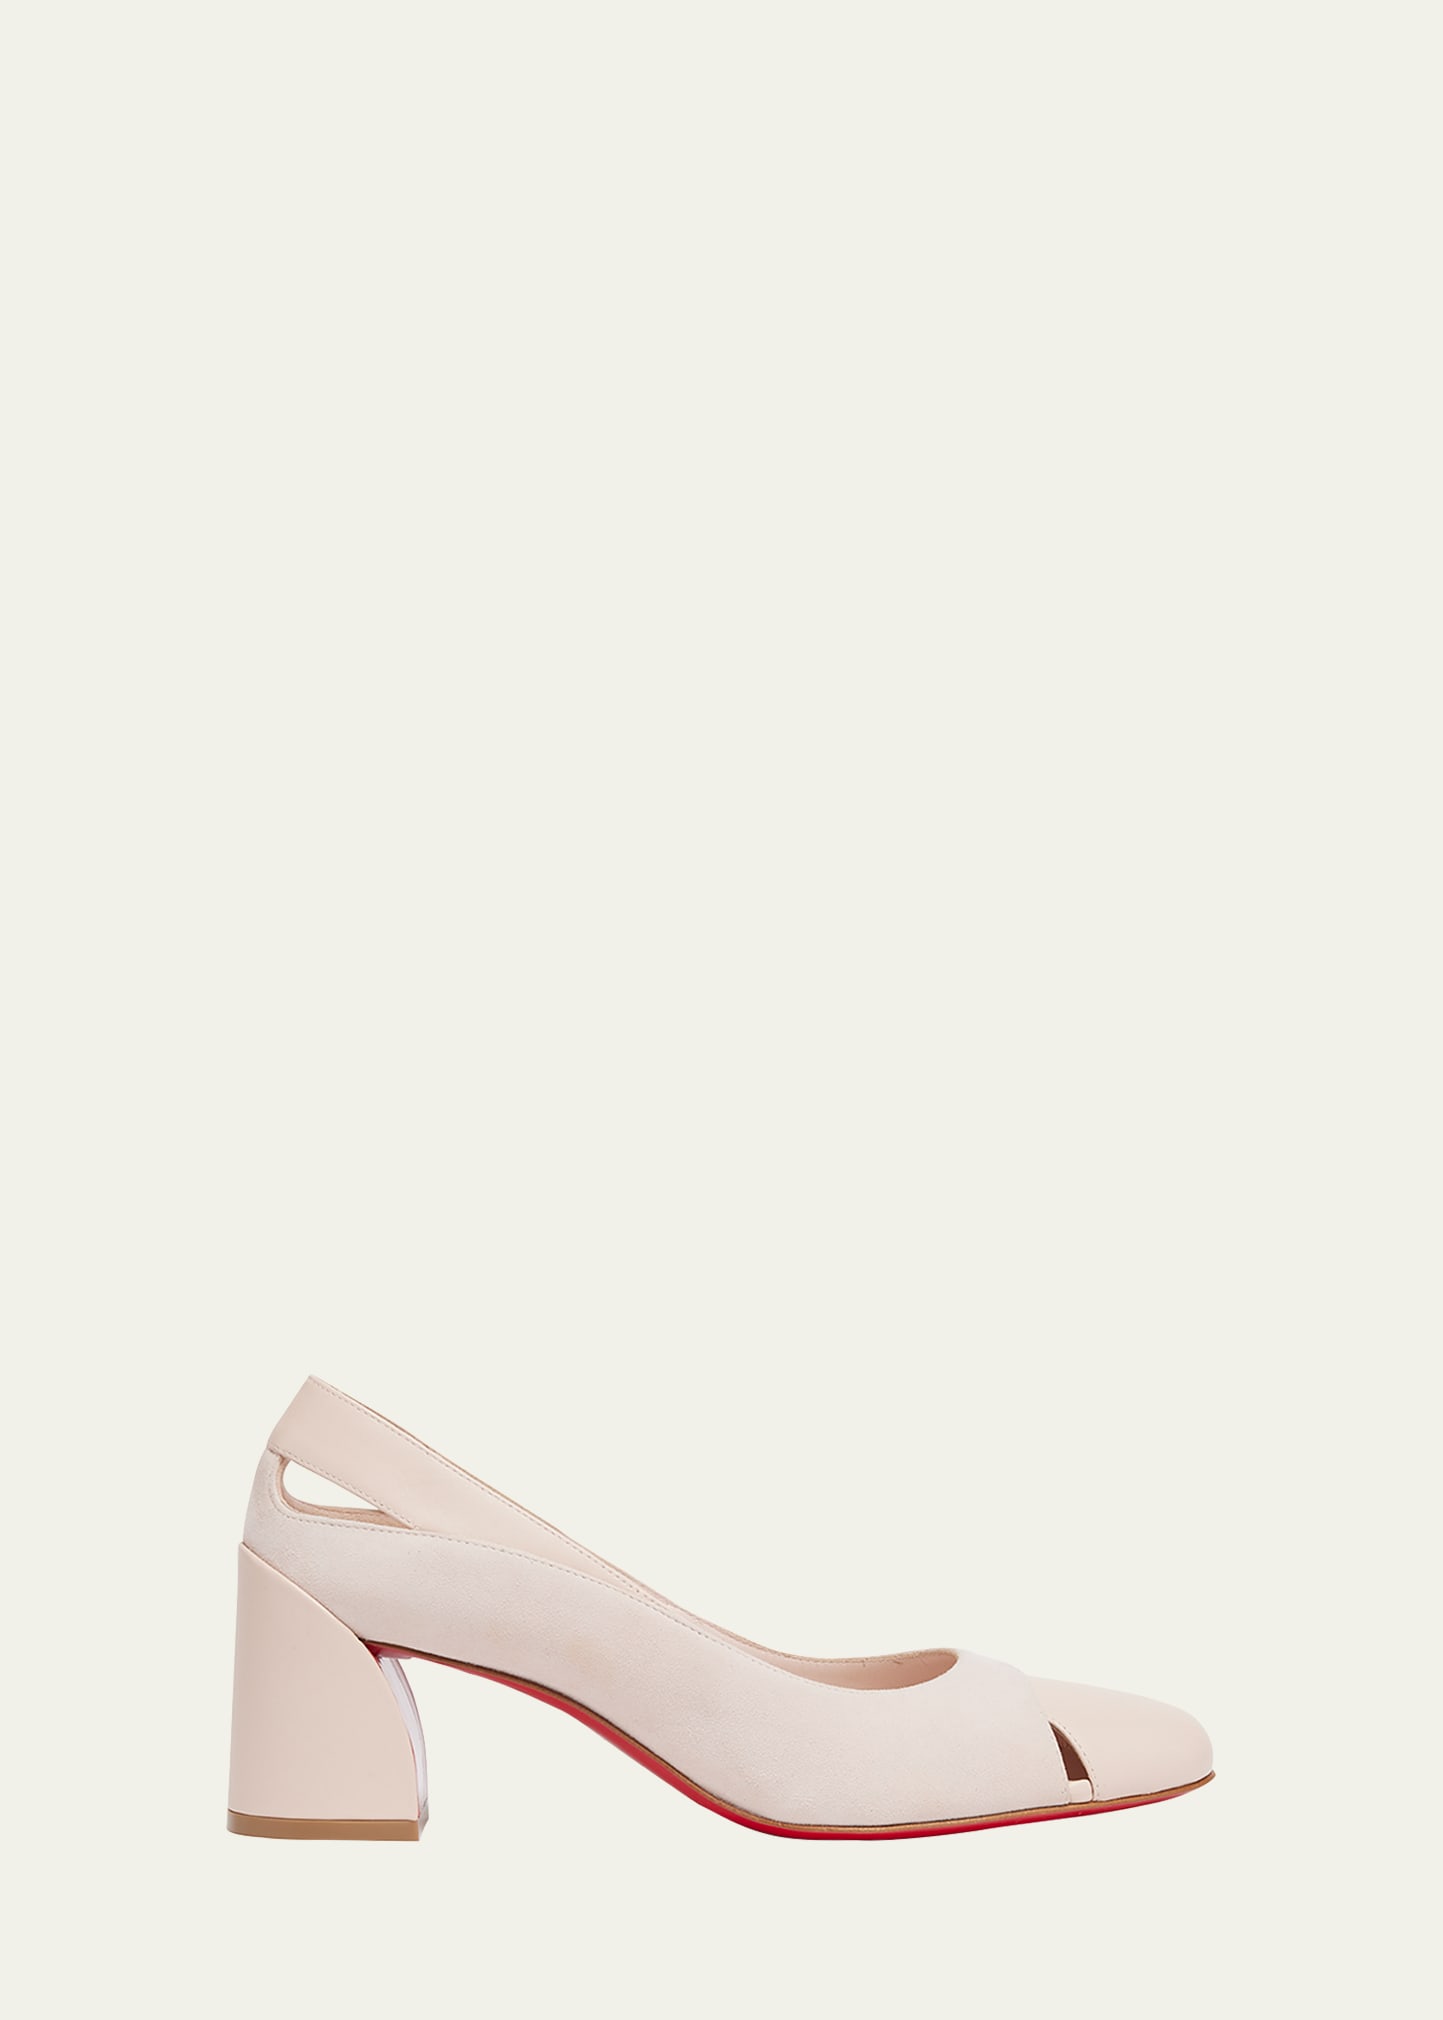 Christian Louboutin Miss Duvette Mixed Leather Red Sole Pumps In Leche